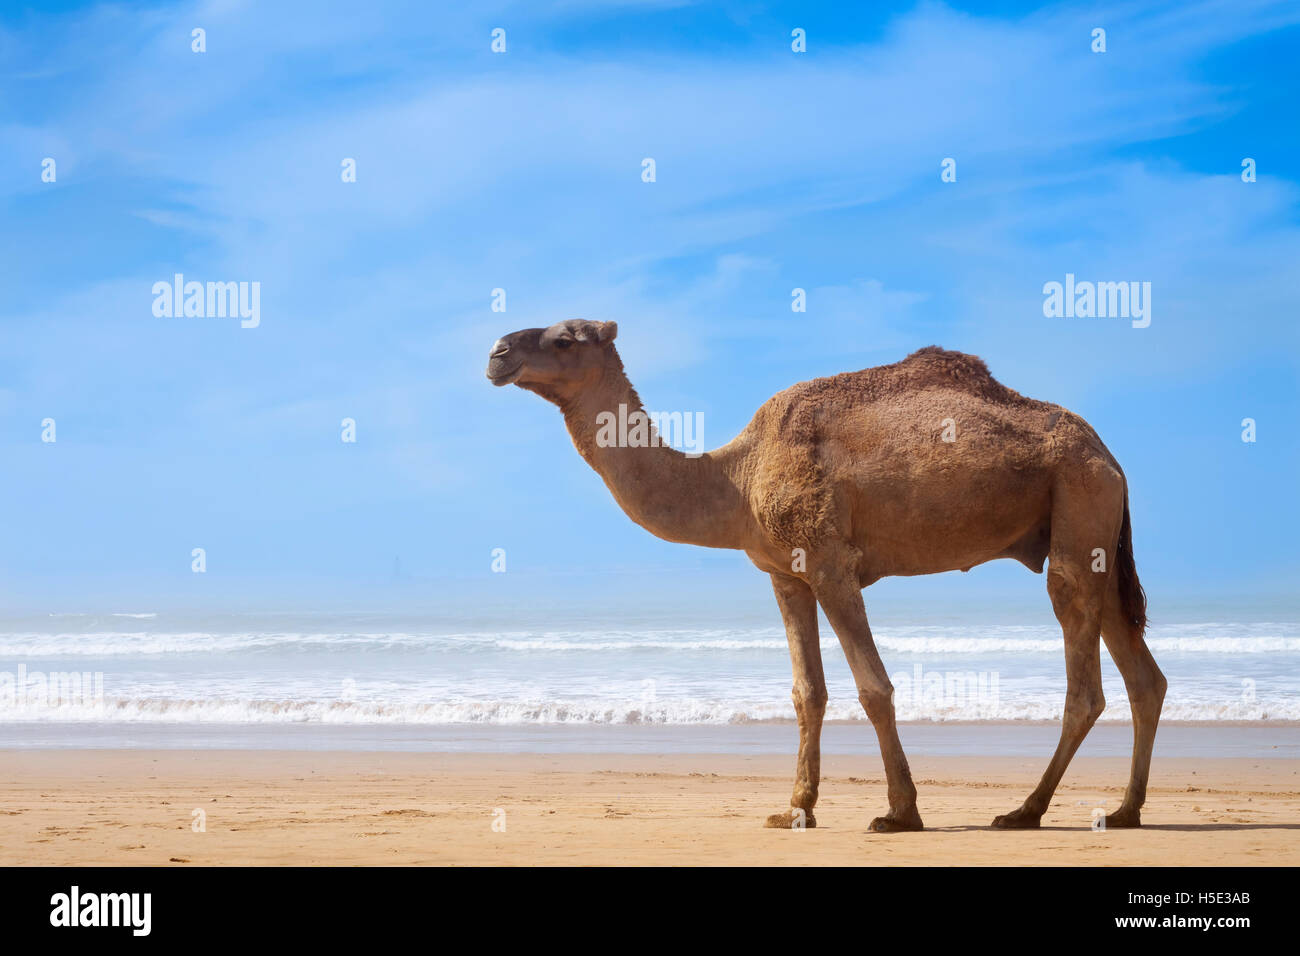 Camel on the beach yellow sand and blue sky Stock Photo